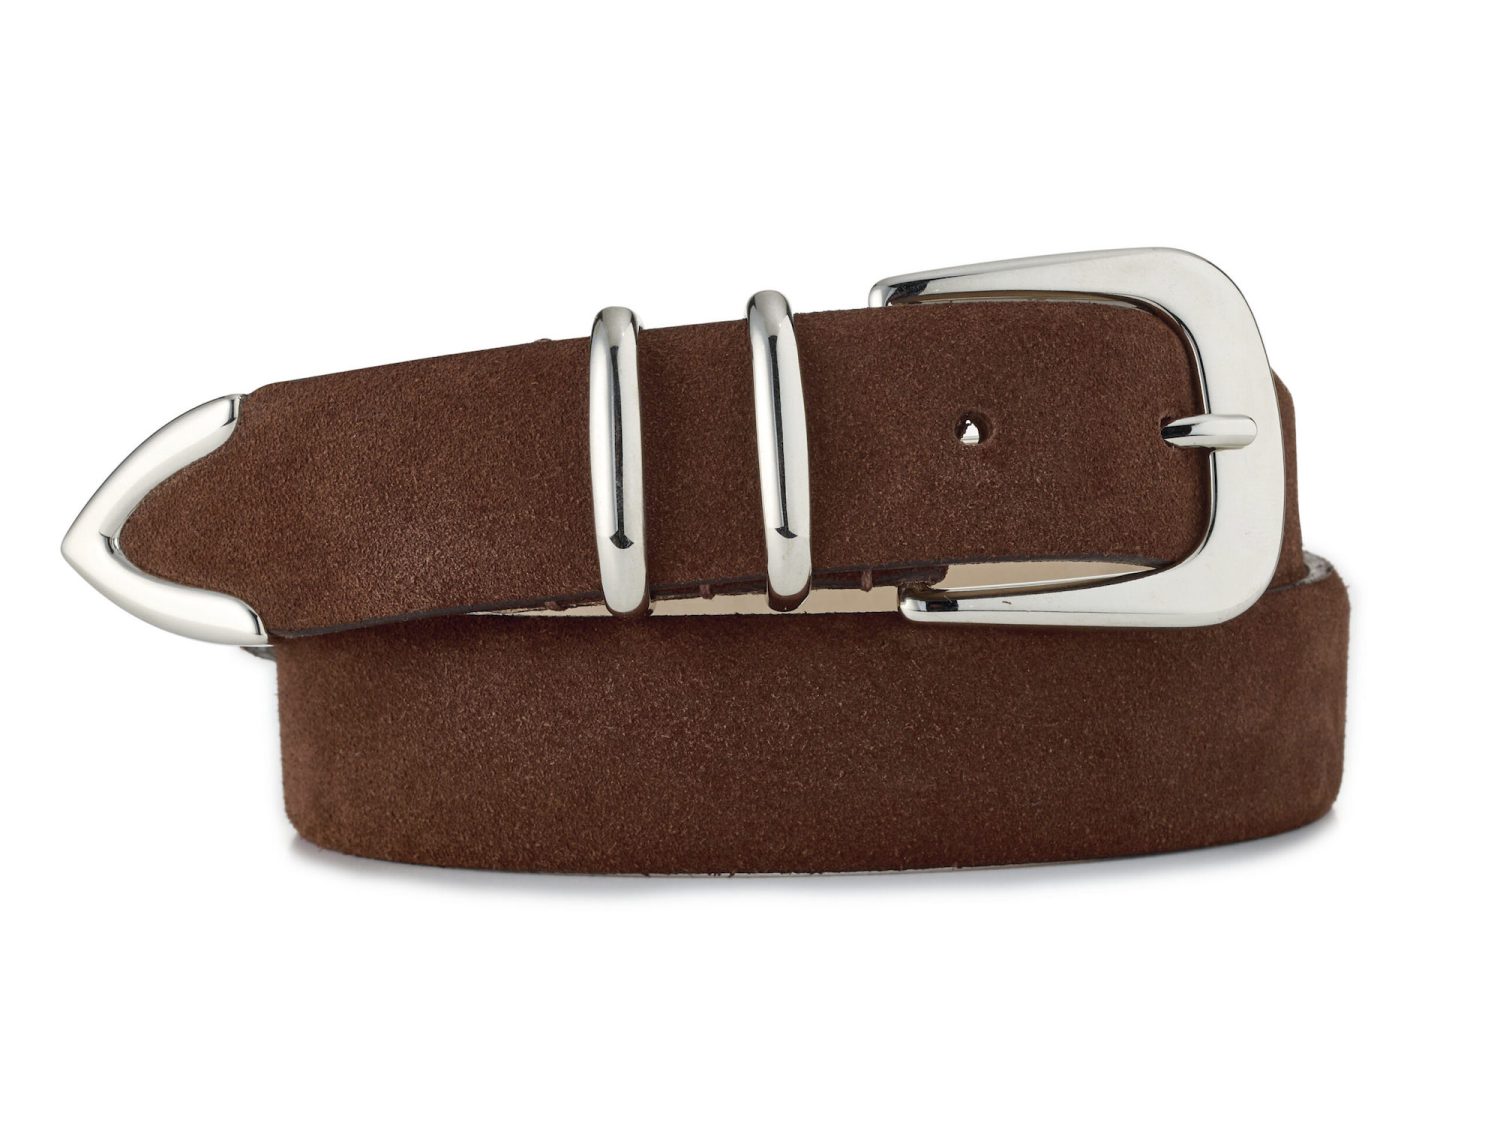 brown suede first class belt with shiny buckle, rolled